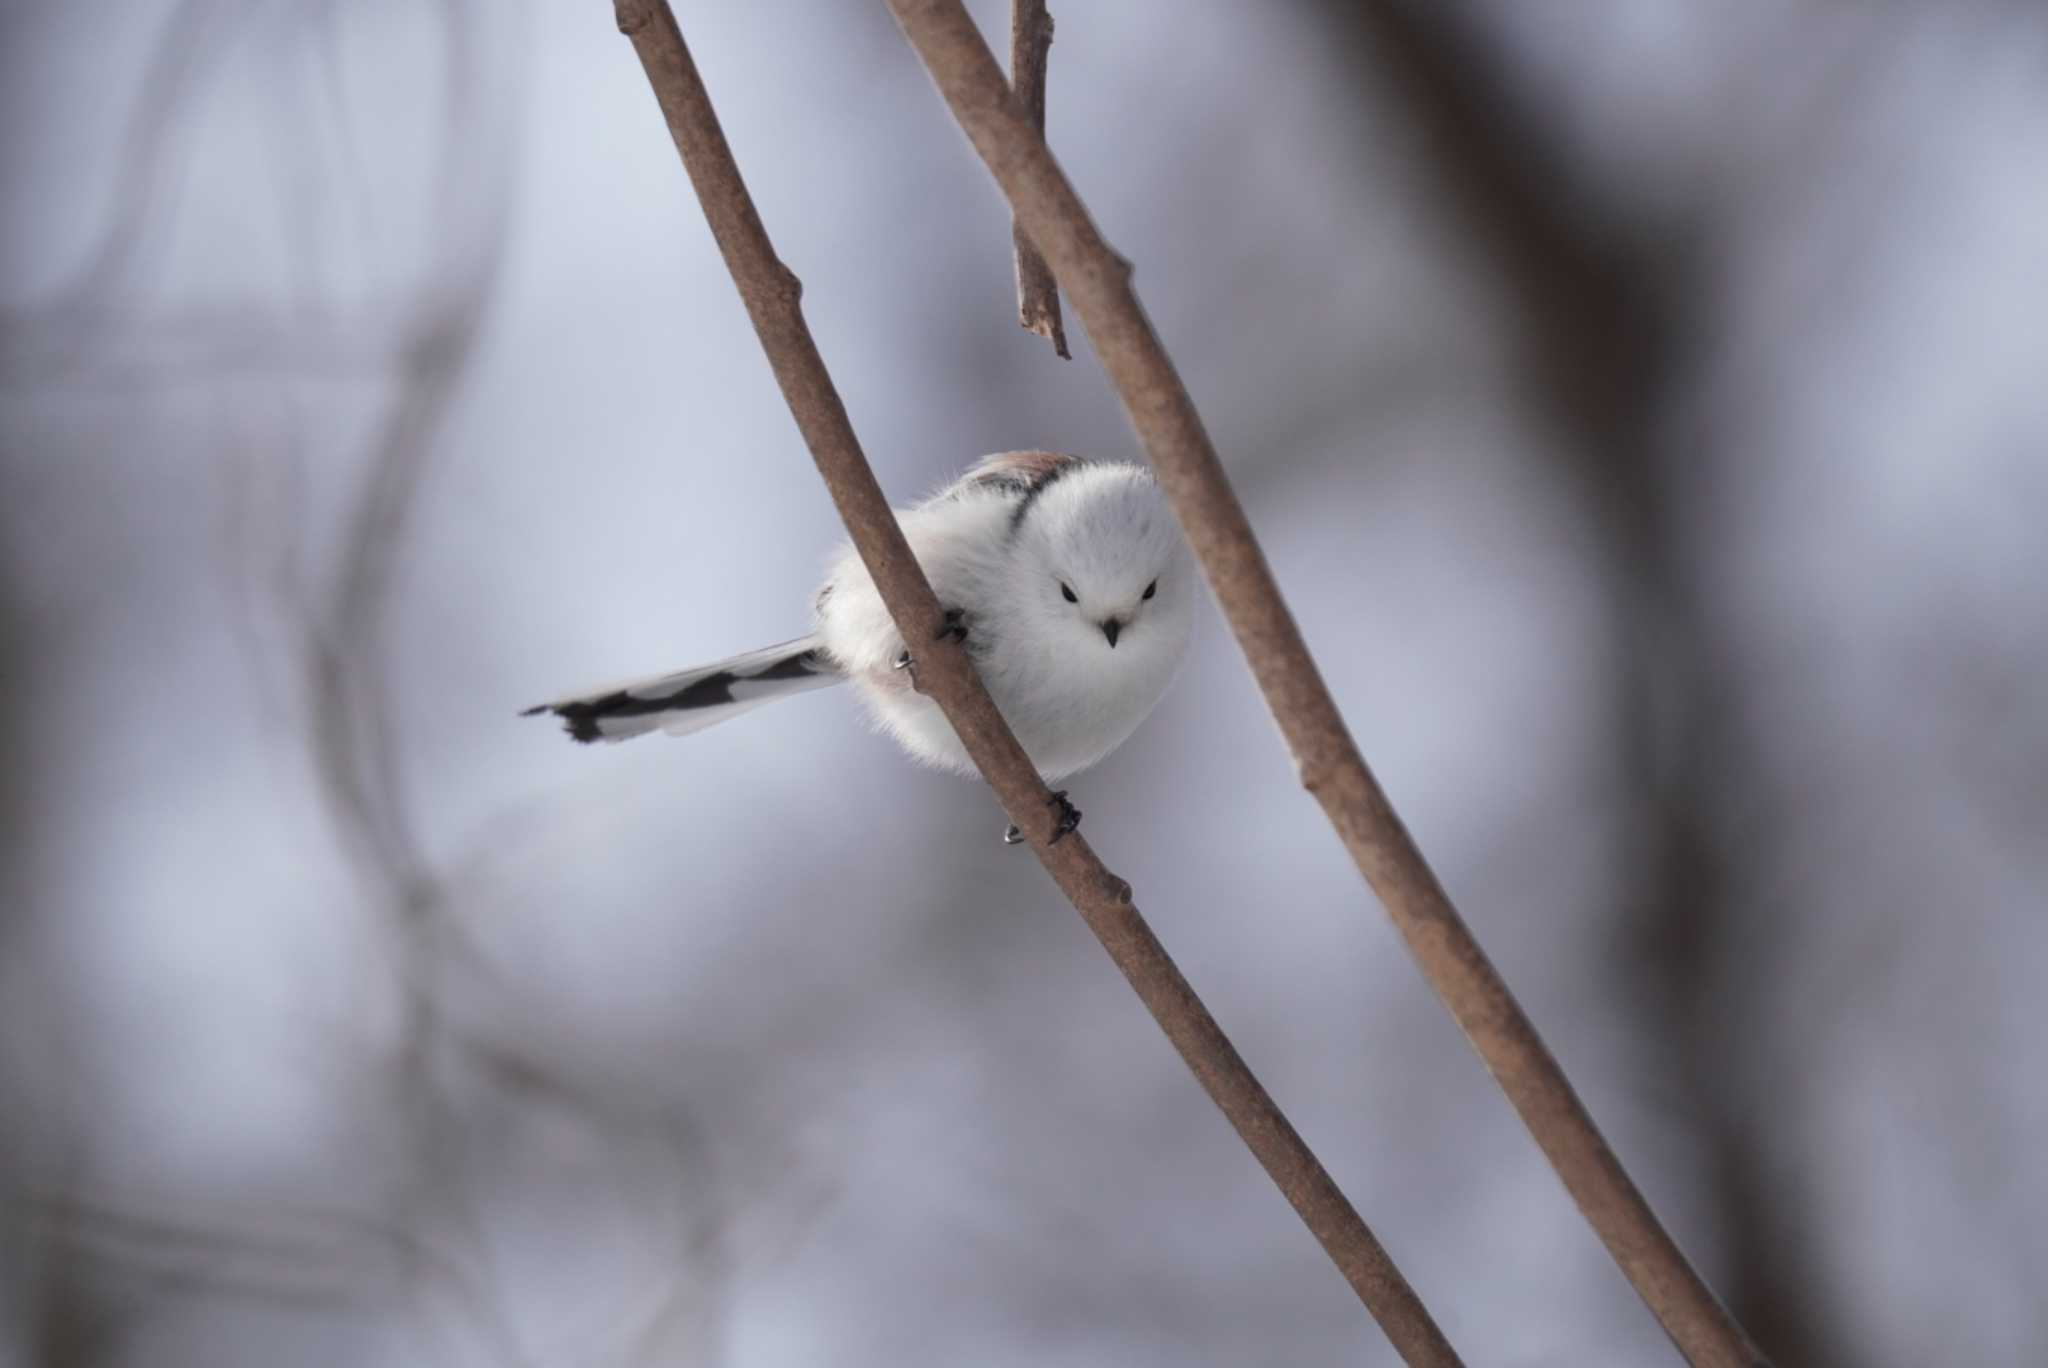 Photo of Long-tailed tit(japonicus) at Makomanai Park by Kたろー